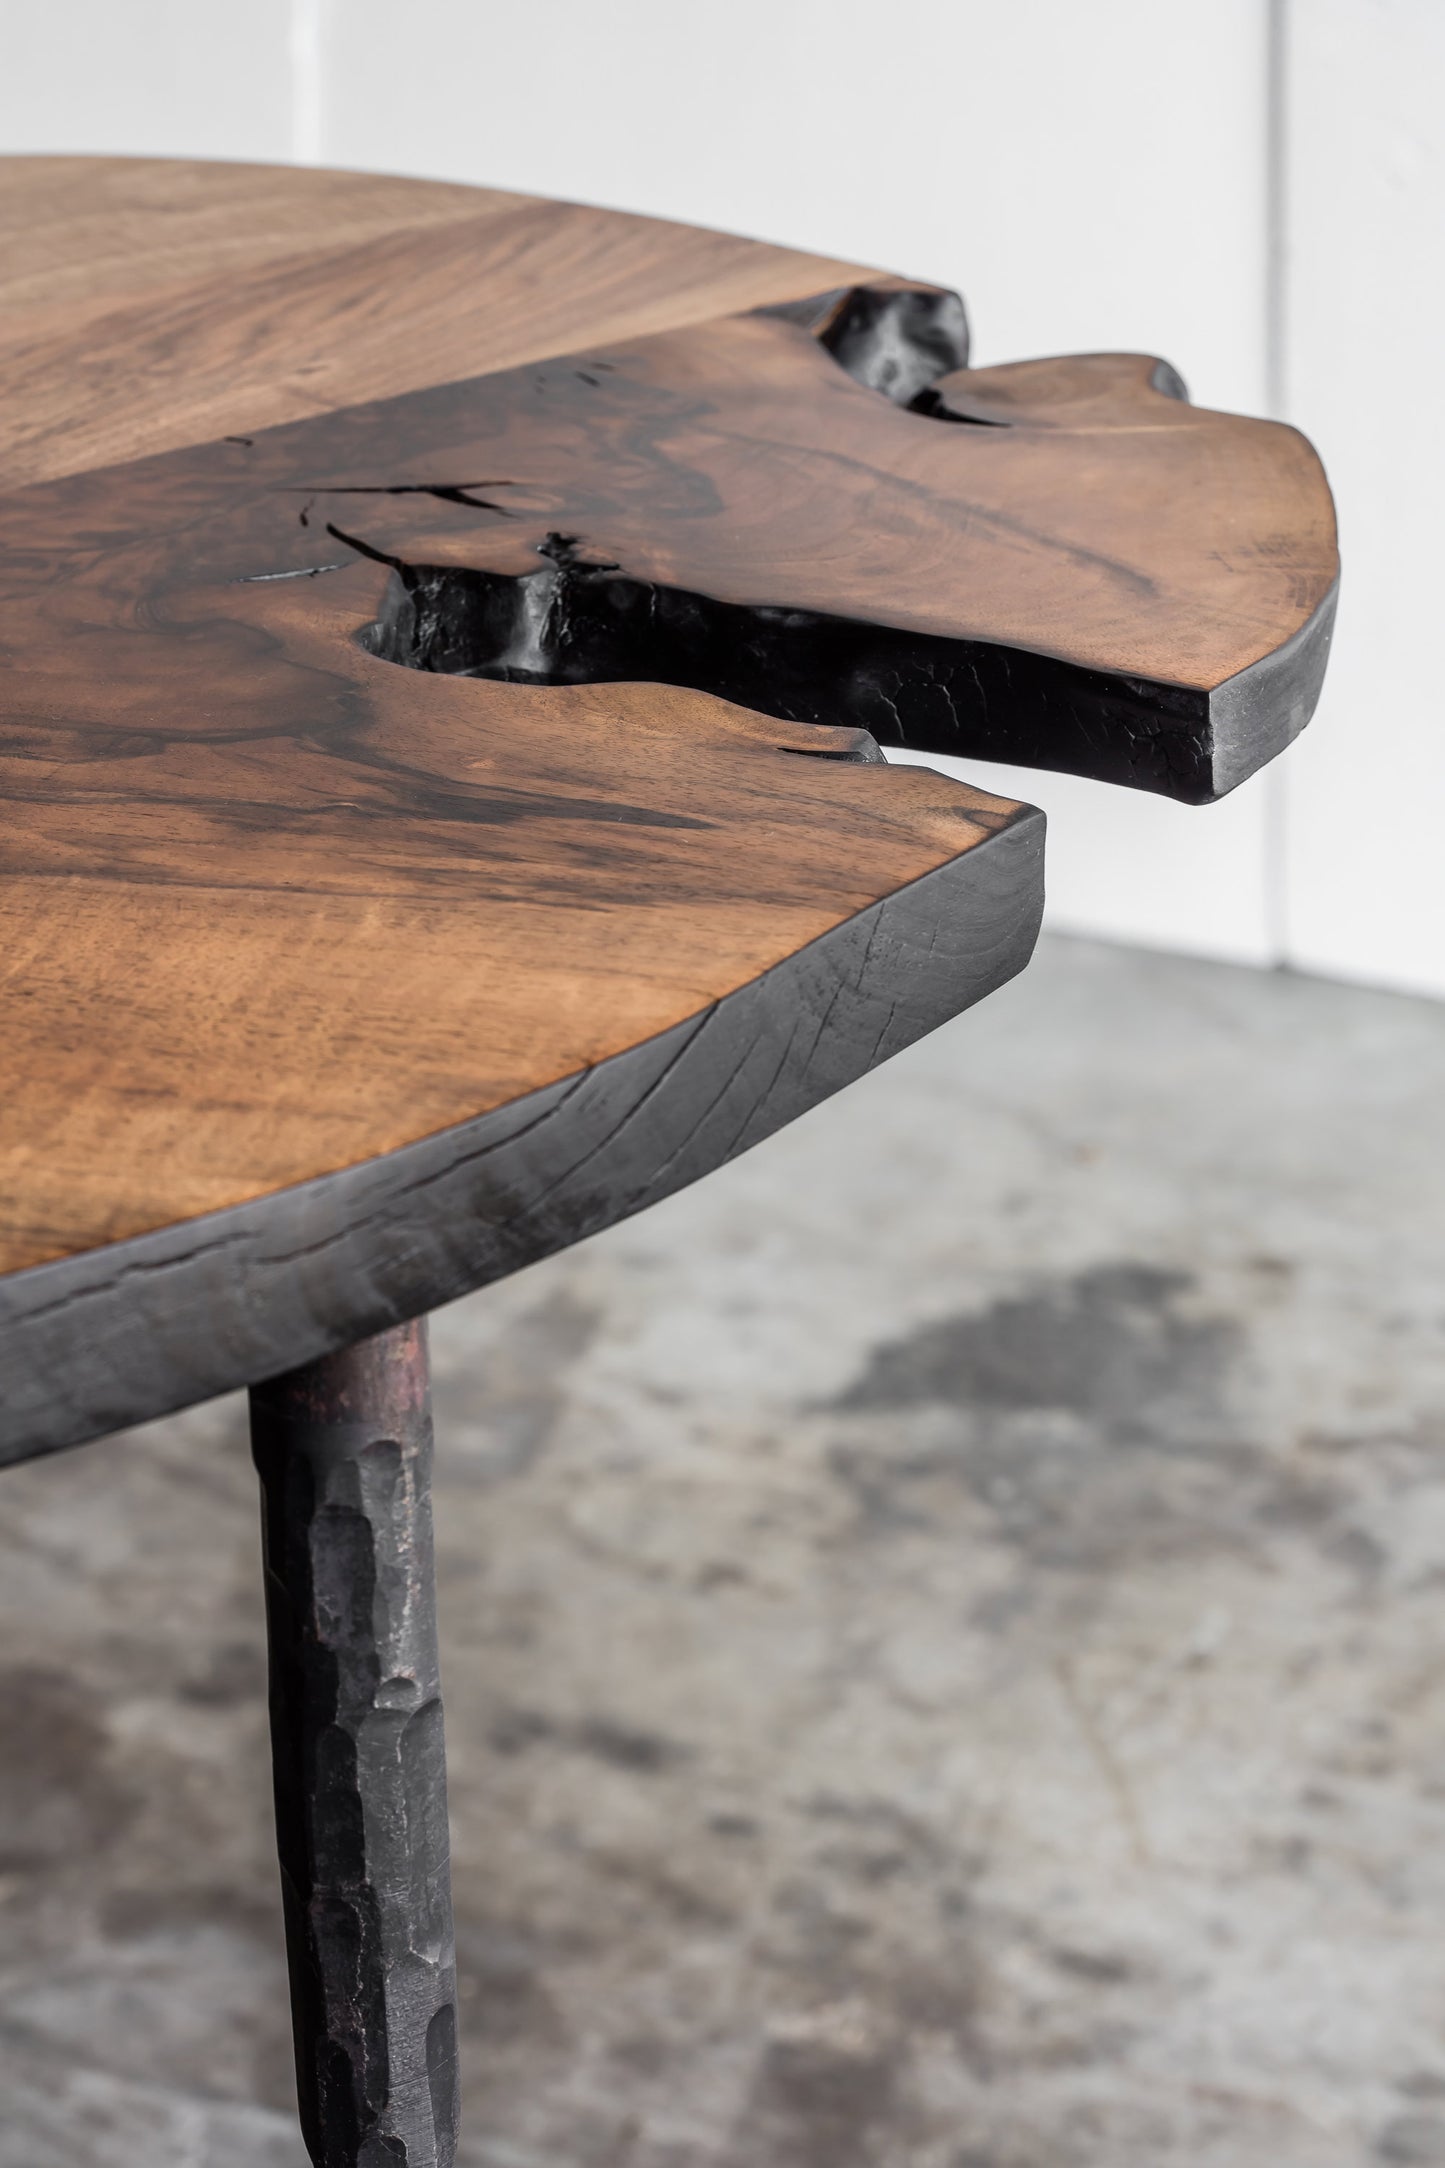 Detail shot of the Heerenhuis Lars Zech Coffee Table - Made from long textured thick walnut wood.